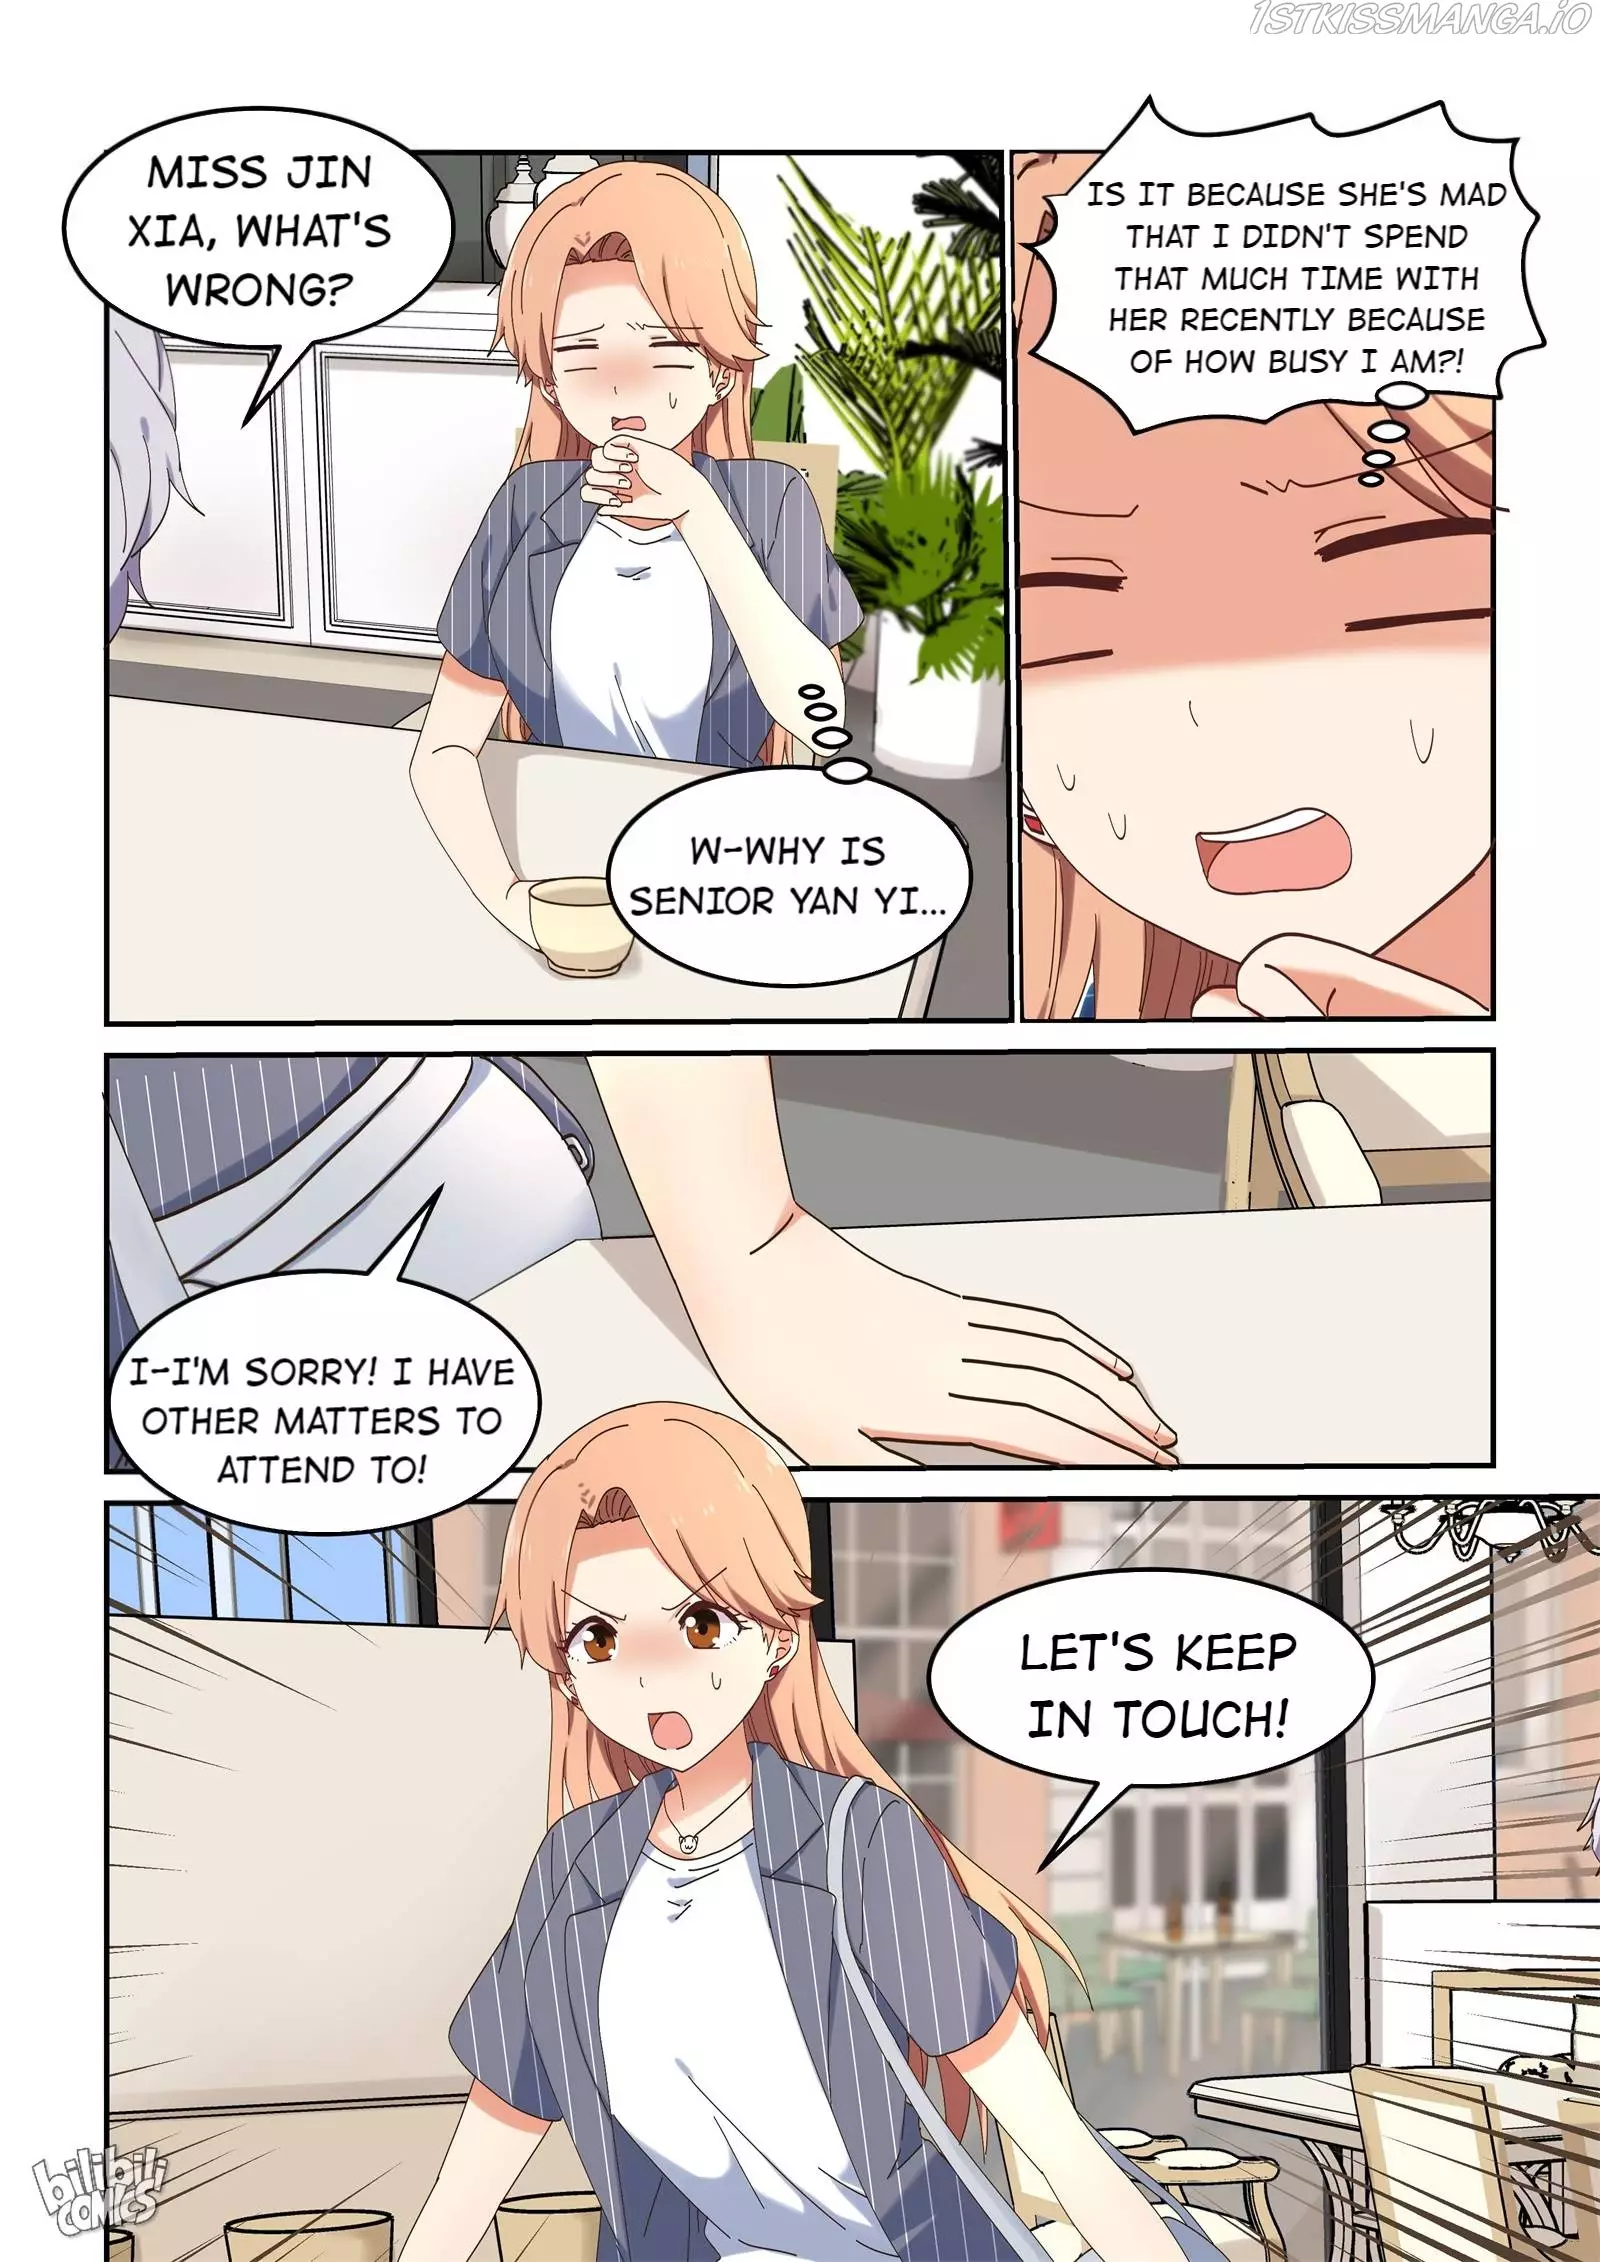 I Decided To Offer Myself To Motivate Senpai - 82 page 17-24471656